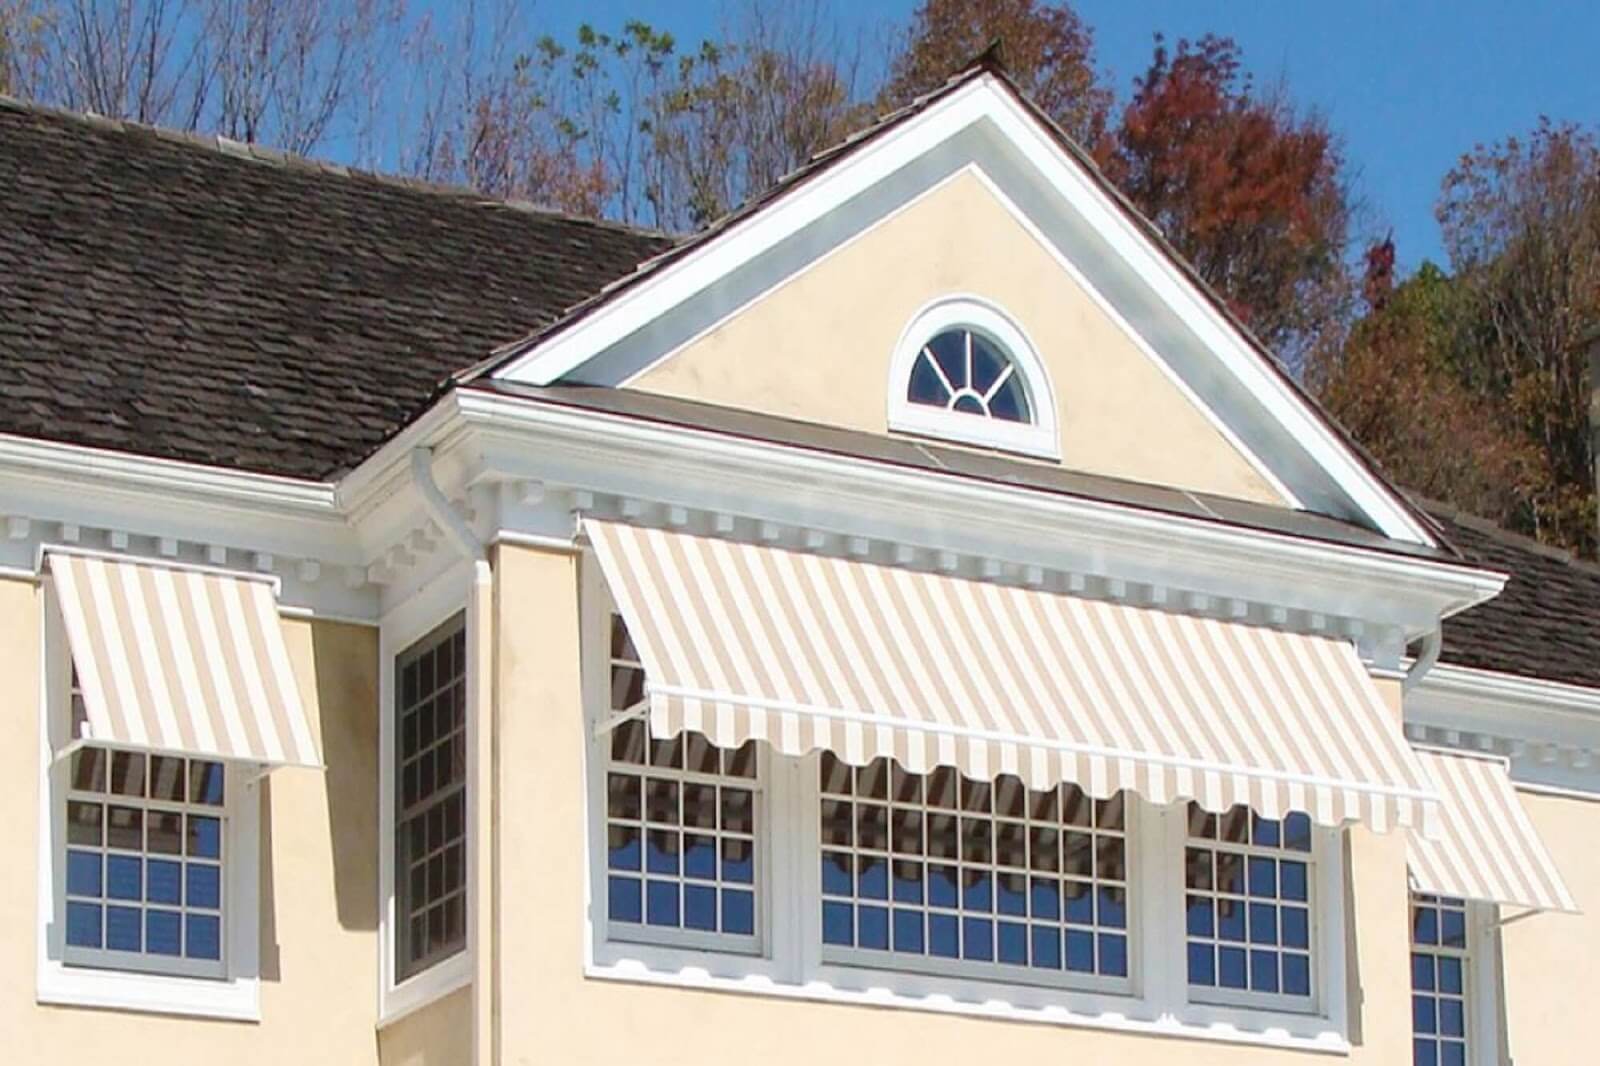 White striped residential retractable window awnings